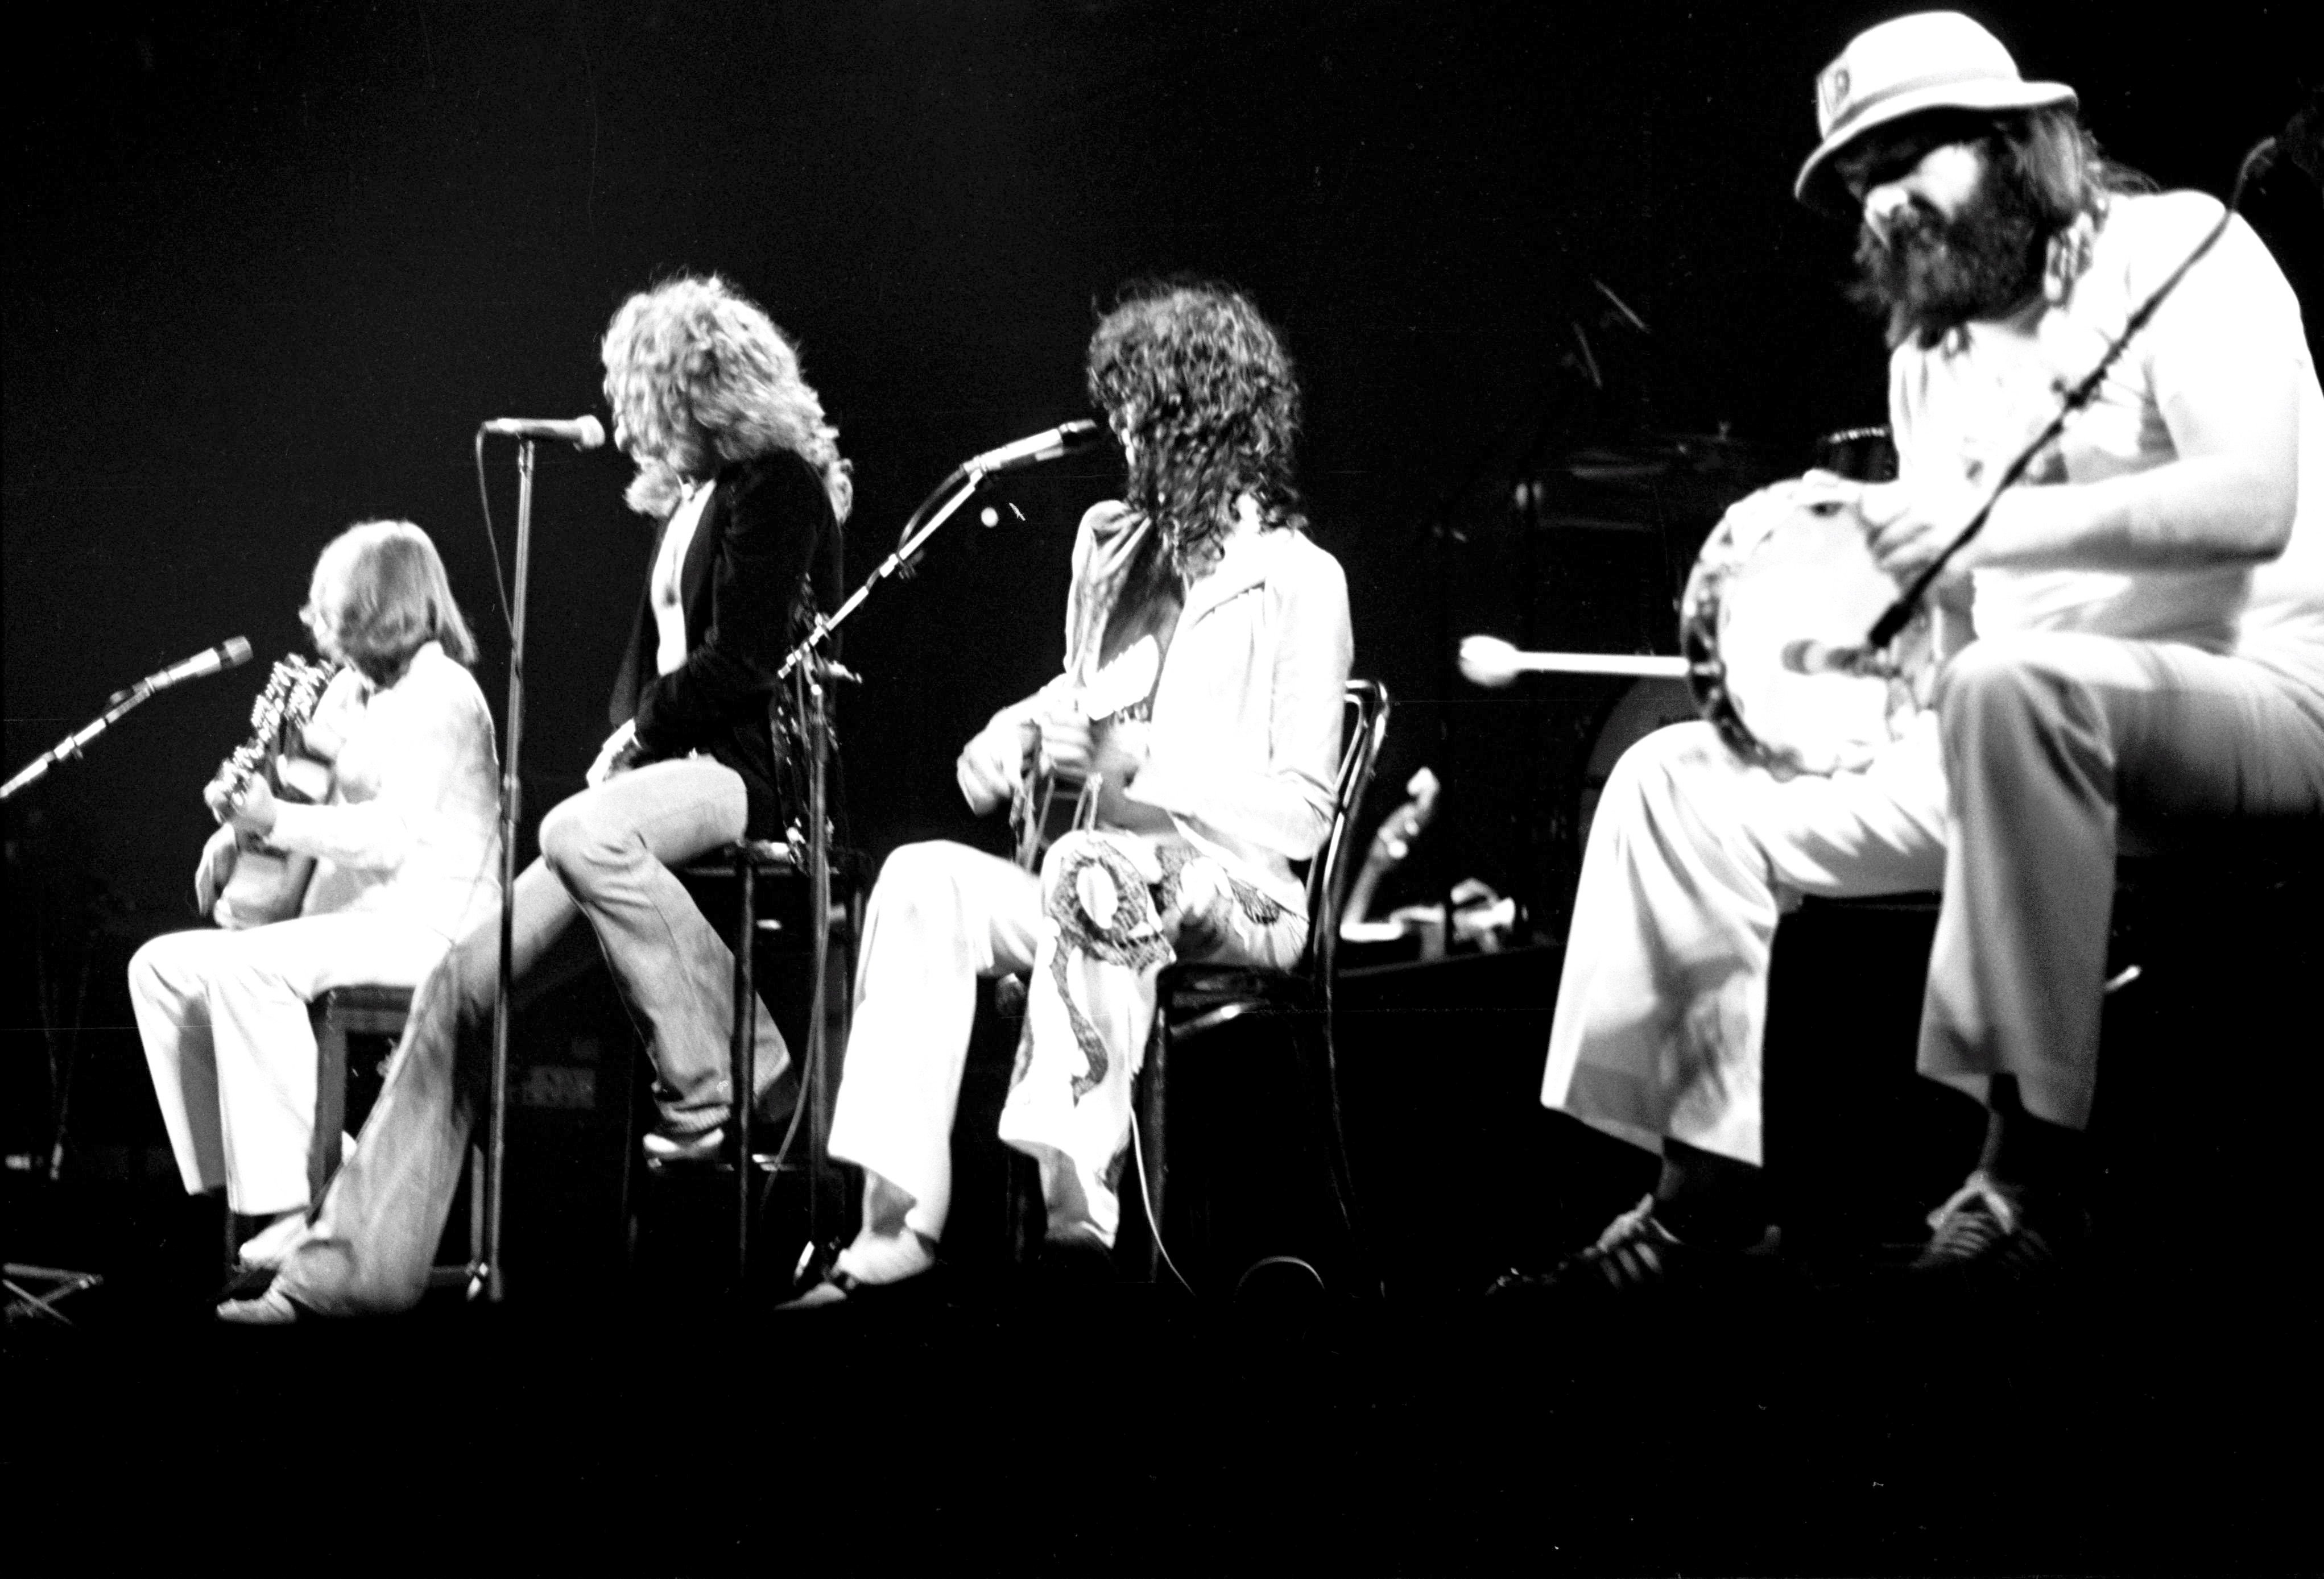 Led Zeppelin performing on stage at Madison Square Garden